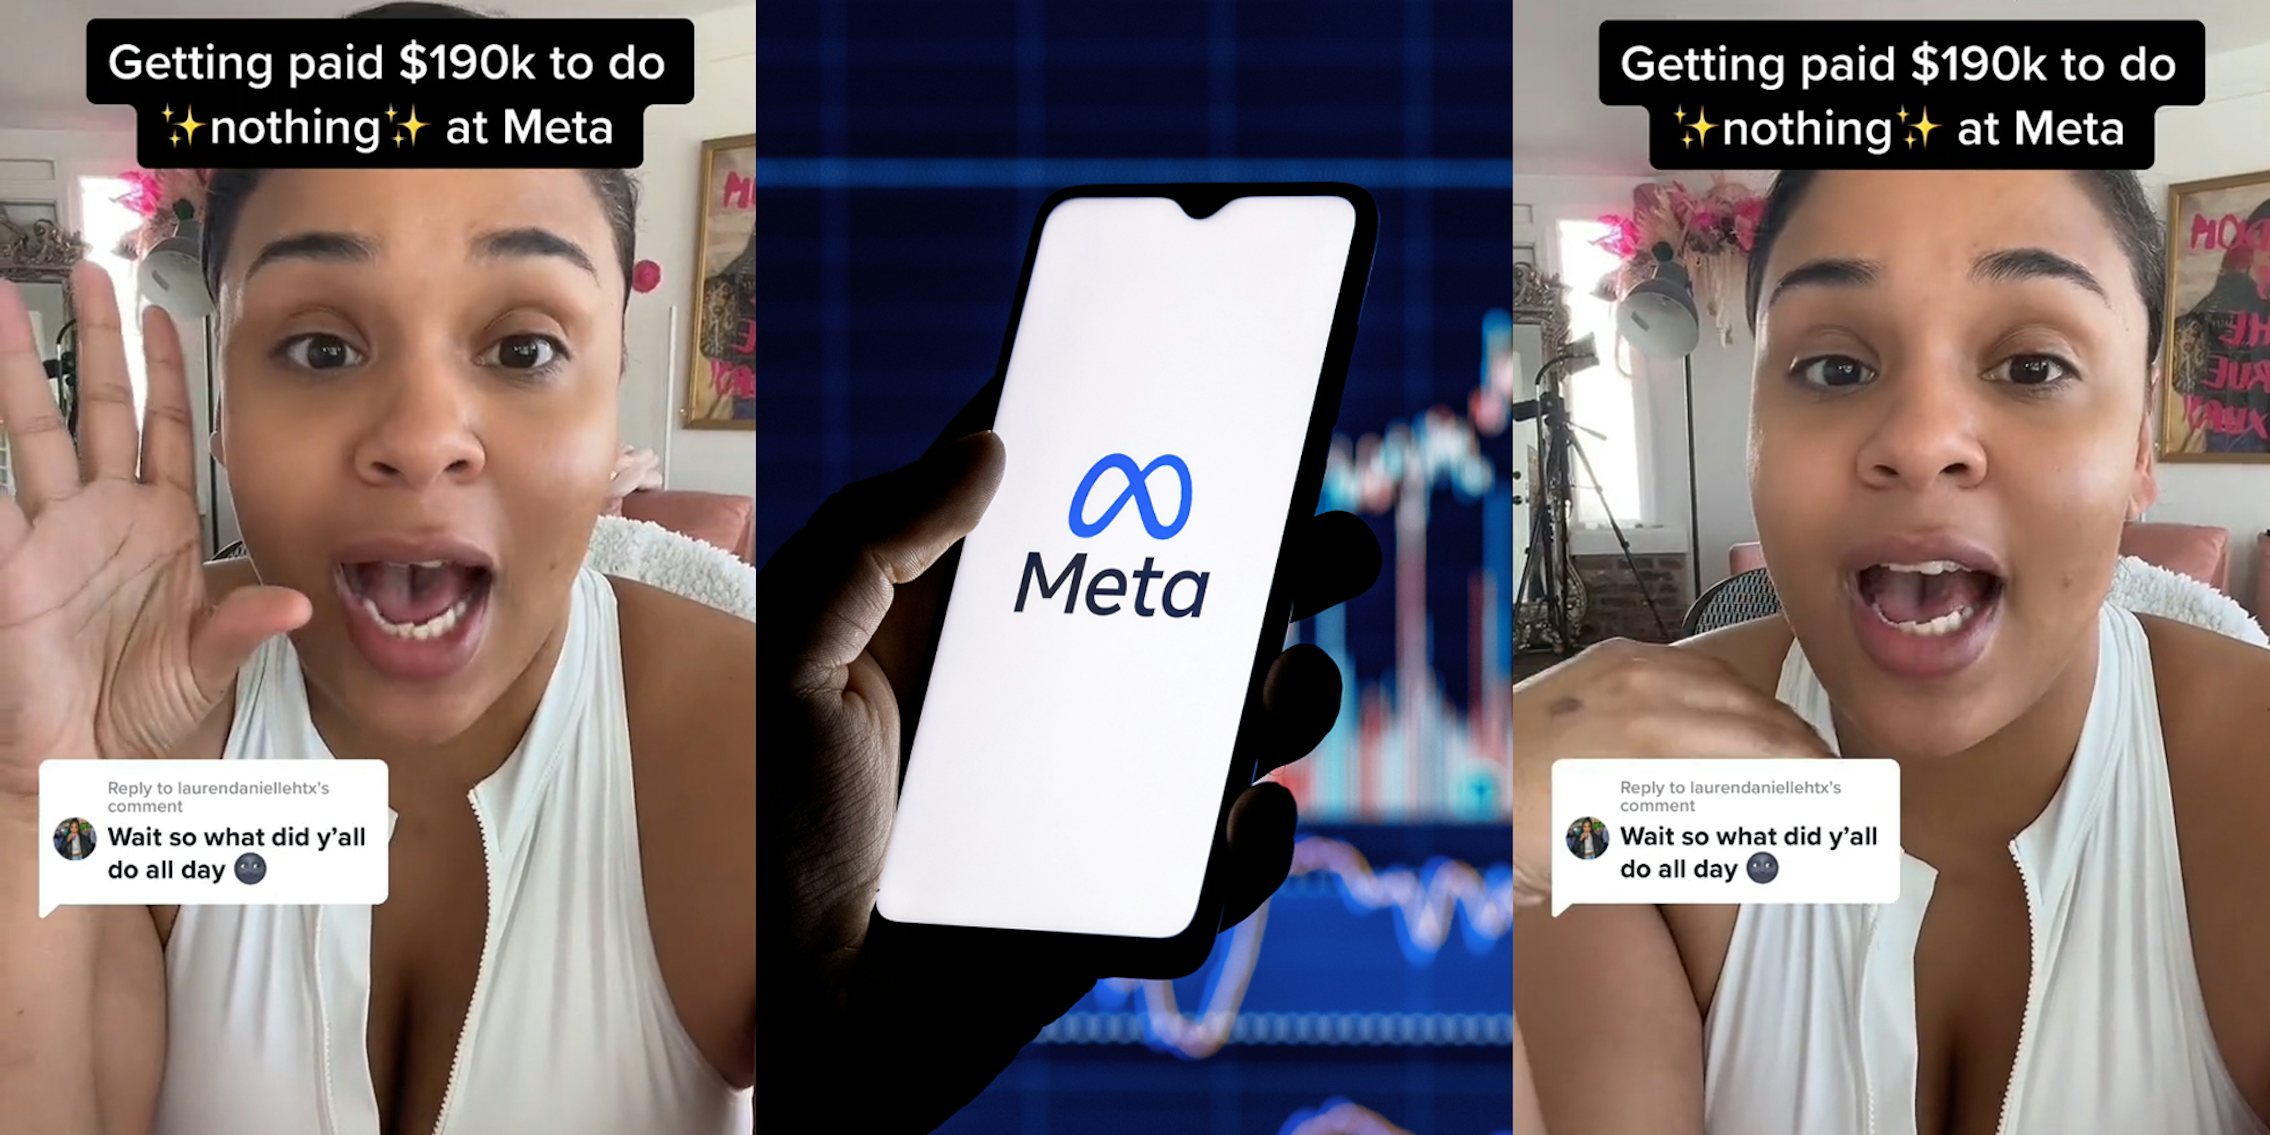 person speaking with caption 'Getting paid $190k to do nothing at Meta' Wait so what did y'all do all day' (l) Meta on phone screen in hand in front of blue graph background (c) person speaking with caption 'Getting paid $190k to do nothing at Meta' Wait so what did y'all do all day' (r)